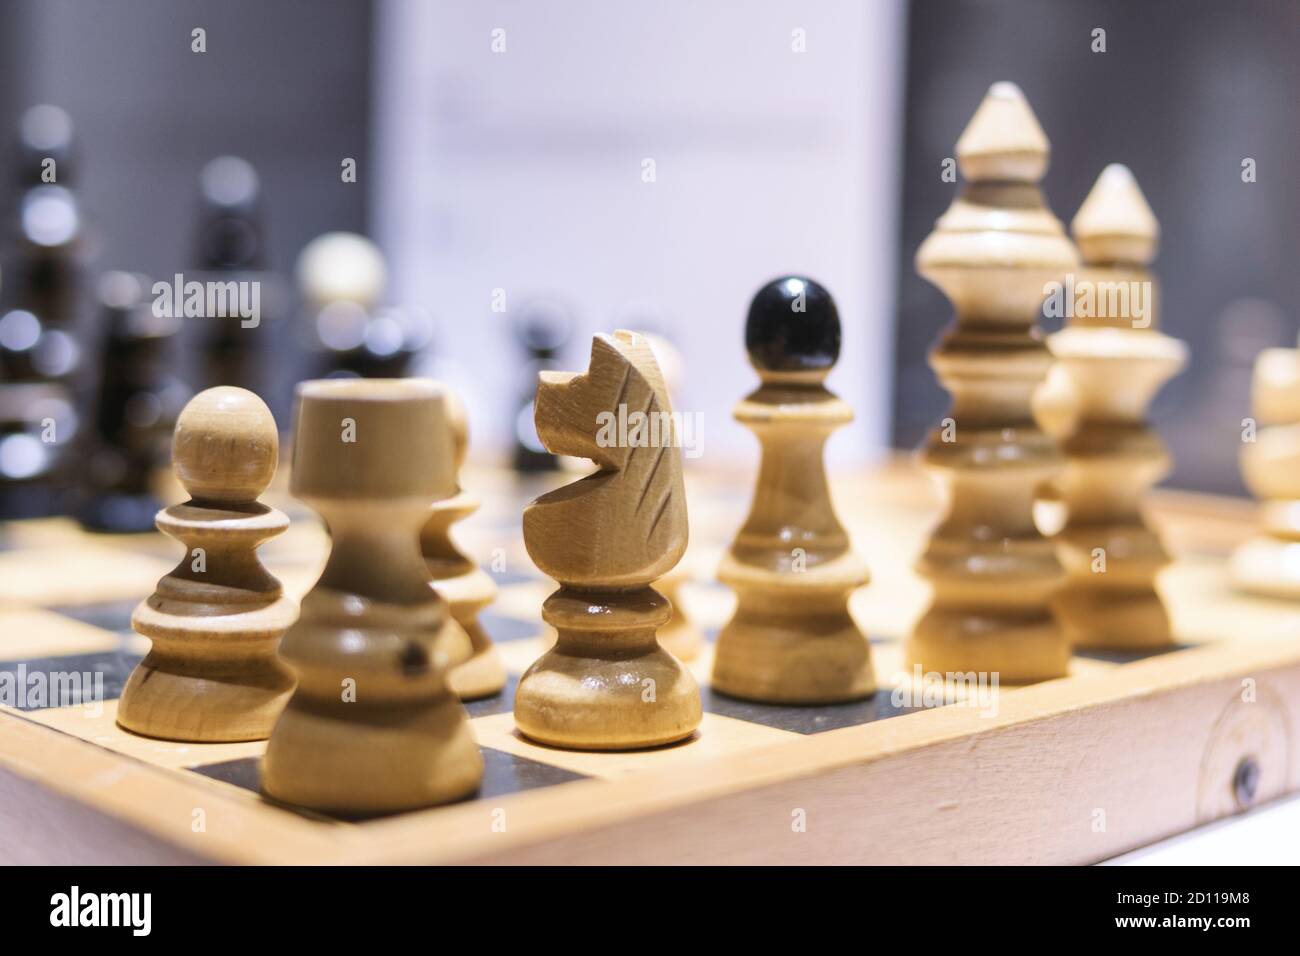 Modern chess figures as a simbol of leadership and success. Business concept. Stock Photo